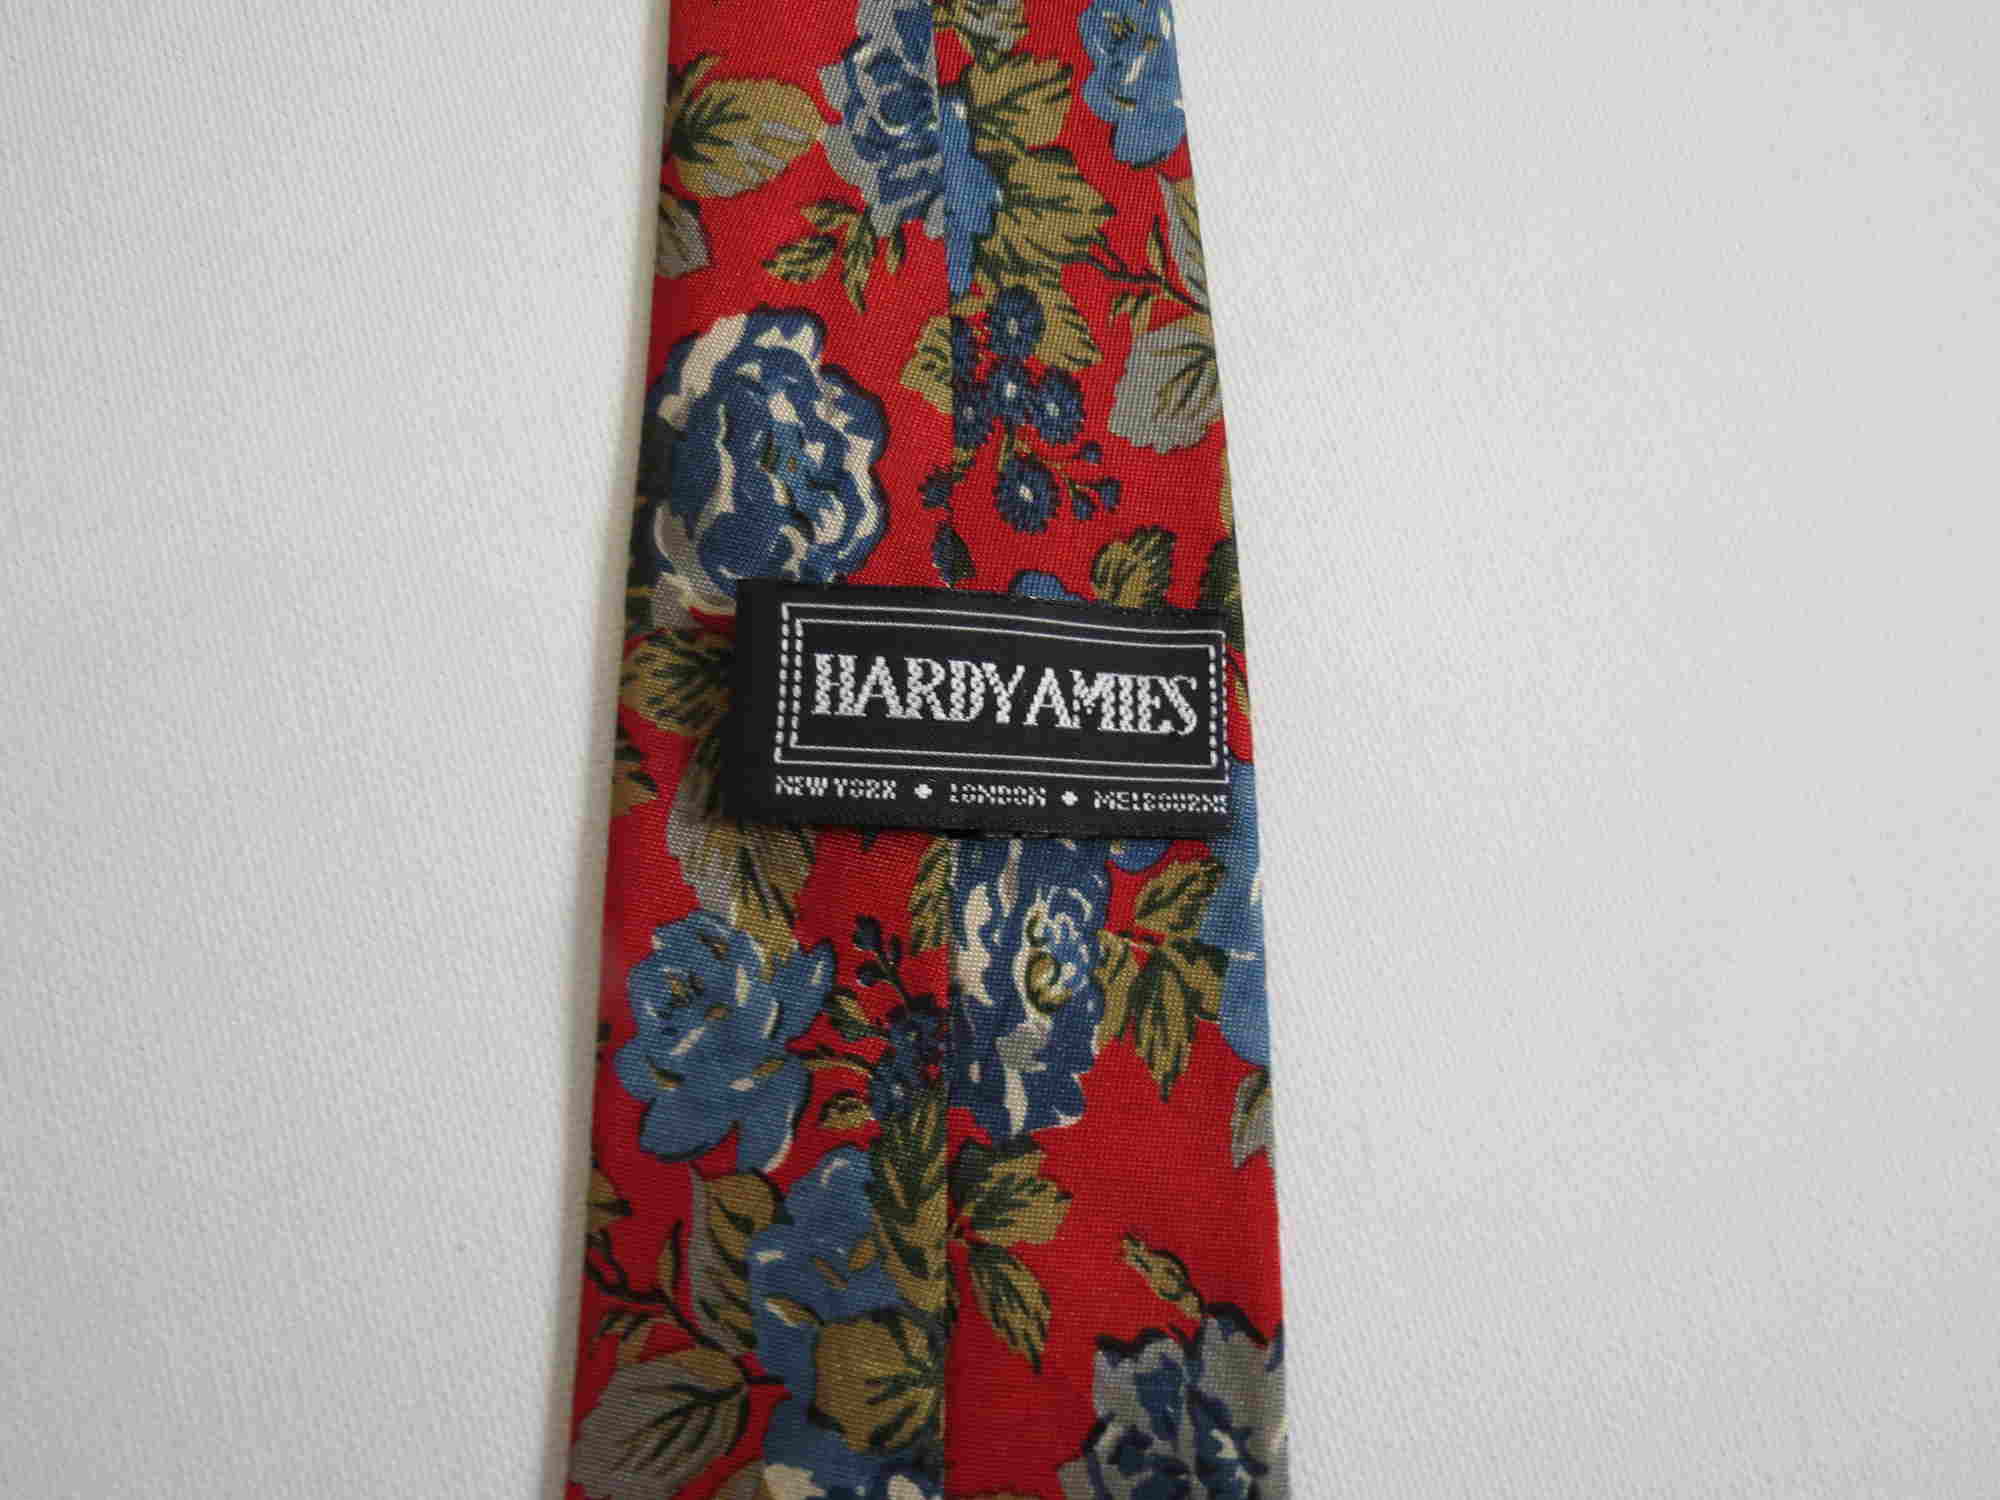 Red & Blue Floral Tie by Hardy Amies